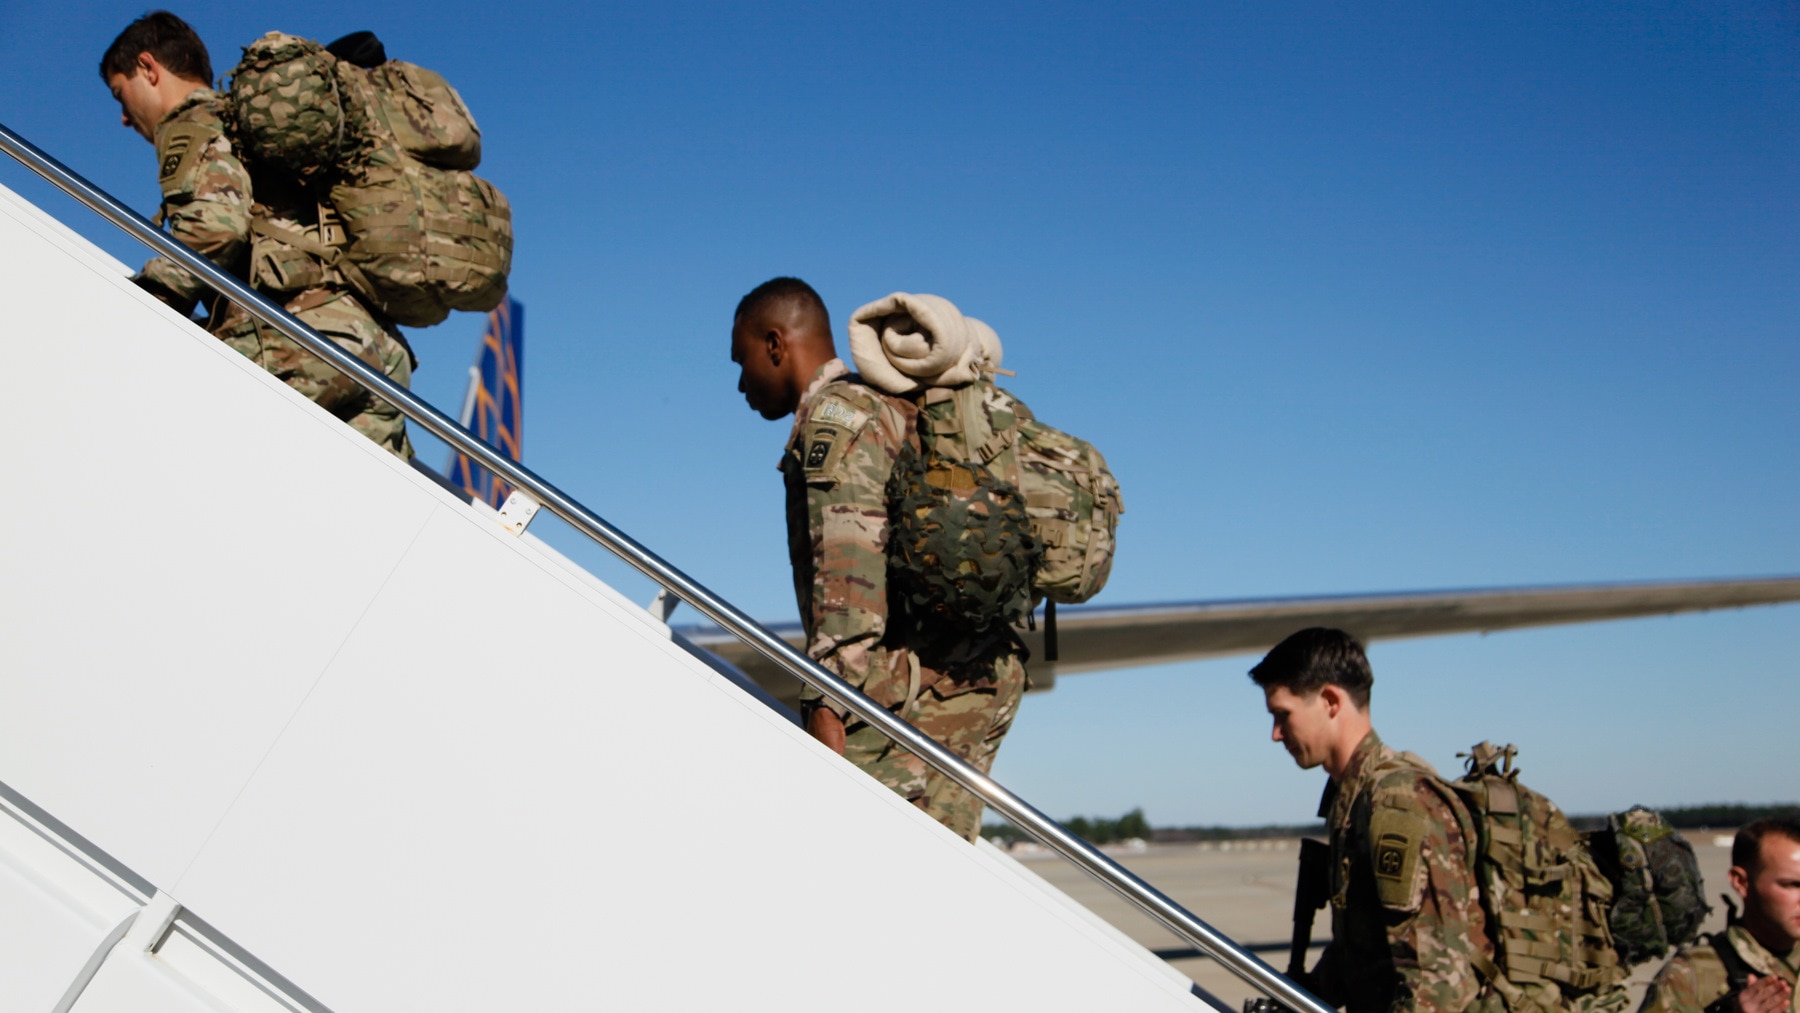 US paratroopers board an aircraft bound for the US Central Command area of operations in the Middle East, from Fort Bragg, North Carolina, 5 January 2020.